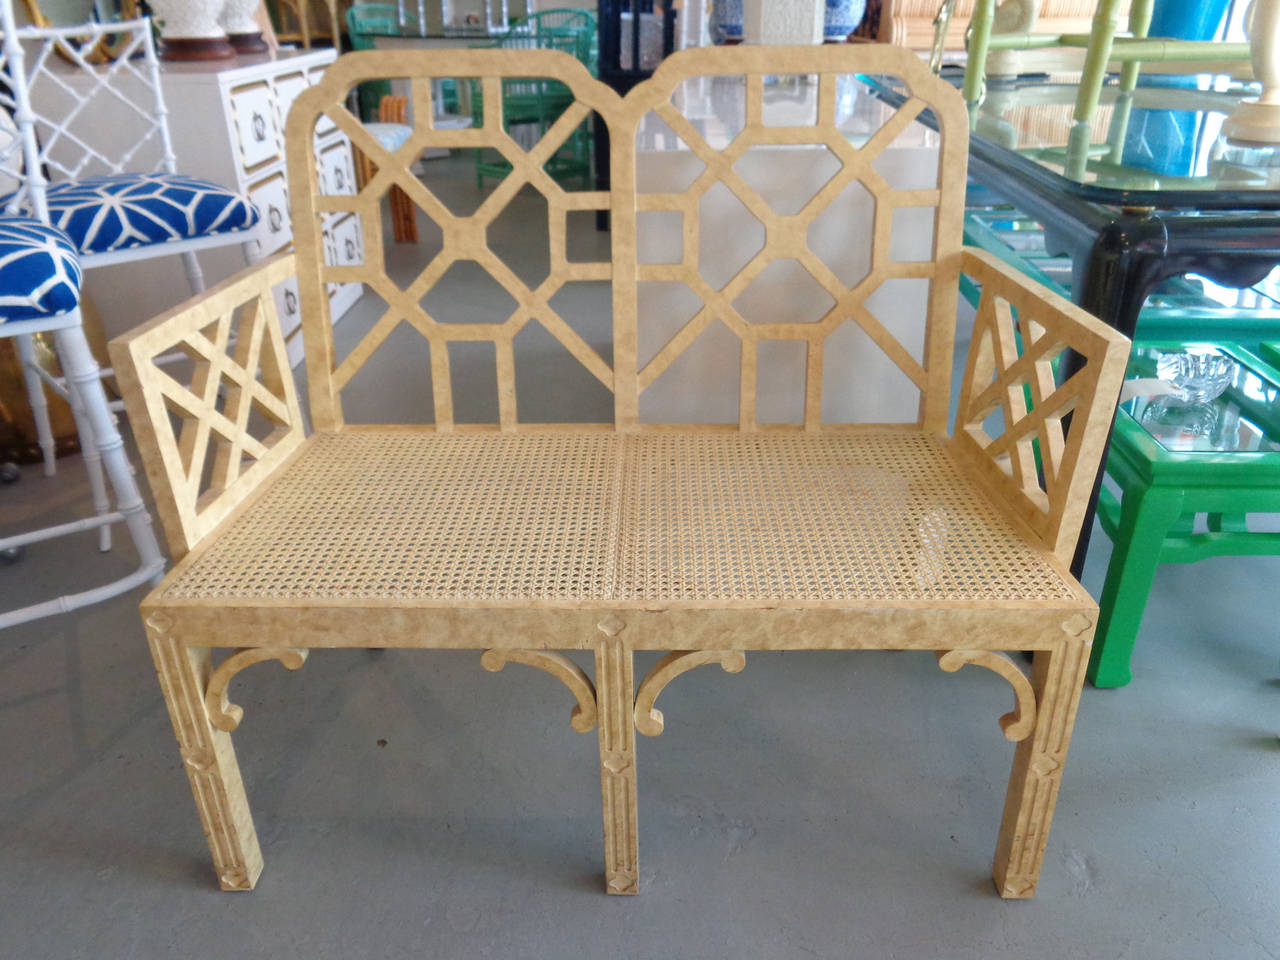 Hollywood Regency style fretwork settee with caned seat in nice as found vintage condition. There are scuffs, scrapes and chips to the as found finish.